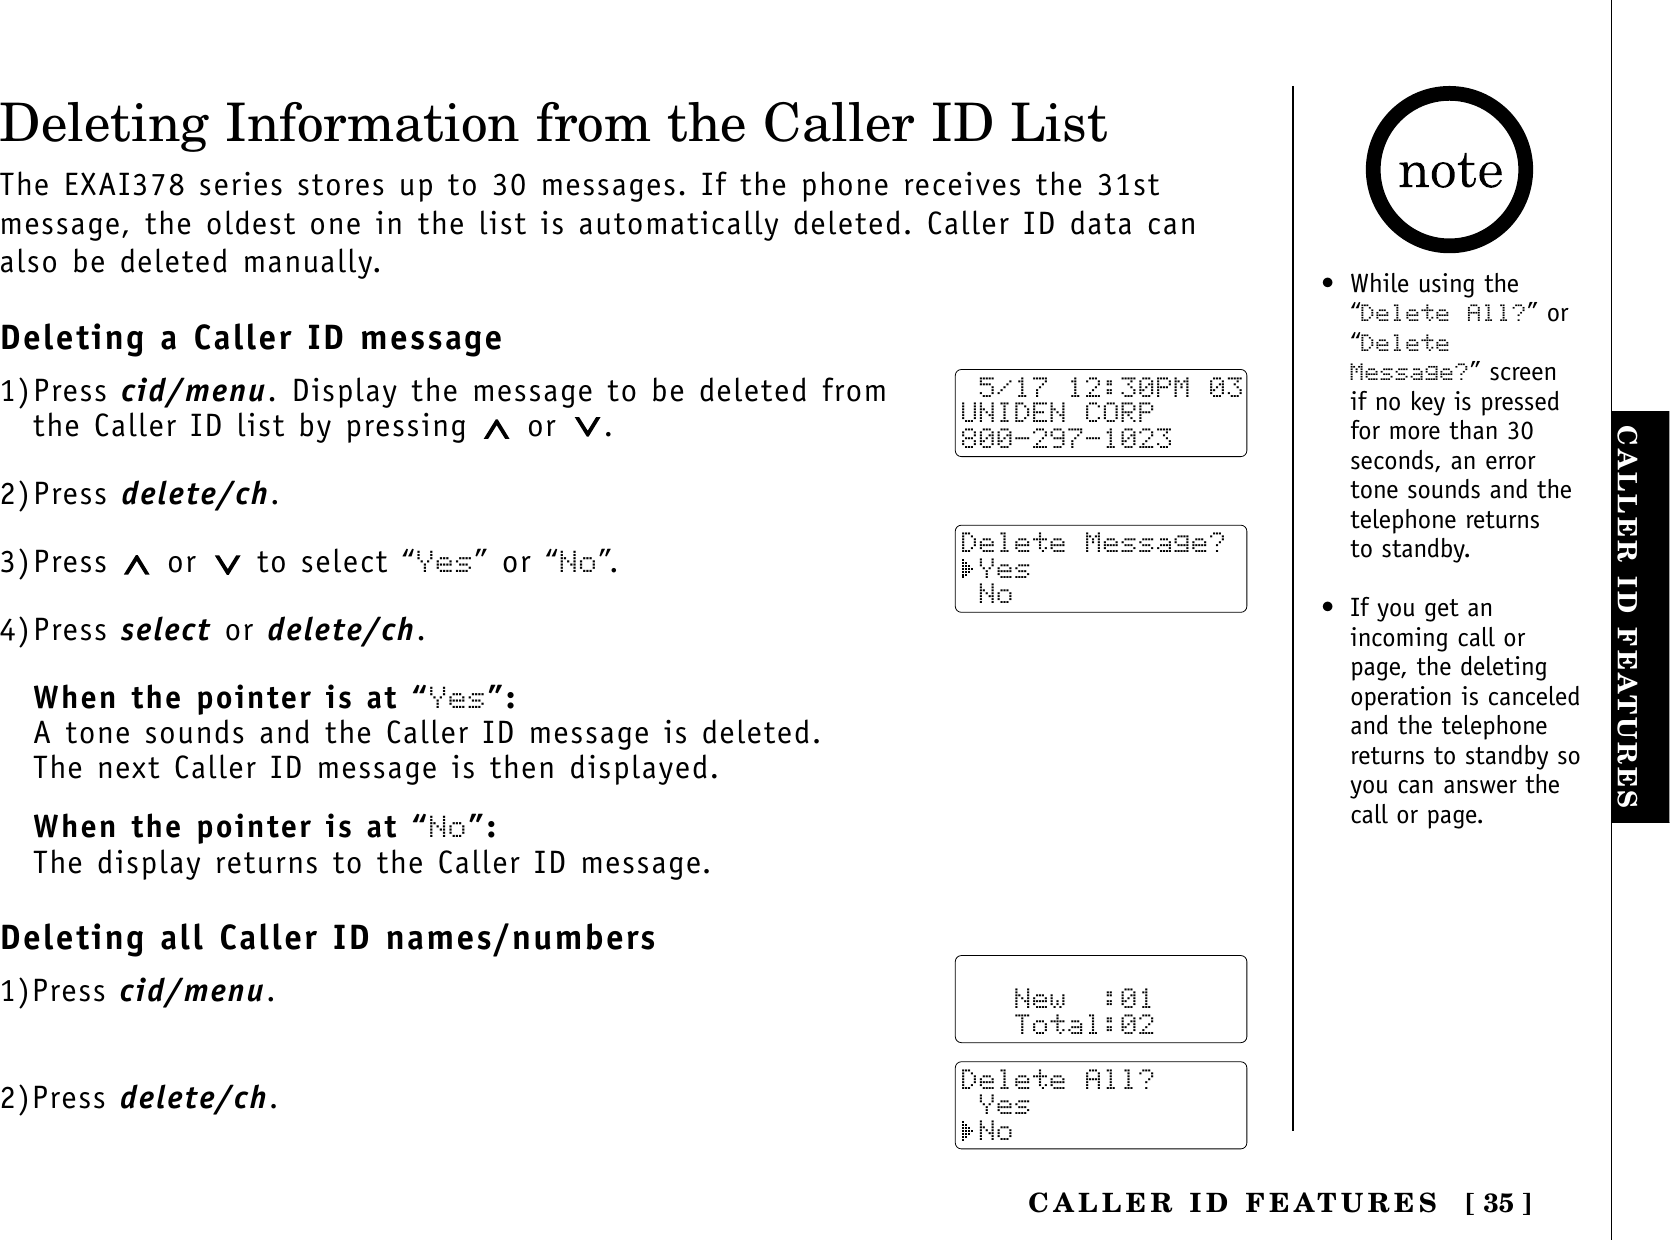 [ 35 ]CALLER ID FEATURESCALLER ID FEATURESDeleting Information from the Caller ID ListThe EXAI378 series stores up to 30 messages. If the phone receives the 31stmessage, the oldest one in the list is automatically deleted. Caller ID data canalso be deleted manually.Deleting a Caller ID message1)Press cid/menu. Display the message to be deleted from the Caller ID list by pressing  or .2)Press delete/ch.3)Press  or to select “Yes” or “No”.4)Press select or delete/ch.When the pointer is at “Yes”:A tone sounds and the Caller ID message is deleted. The next Caller ID message is then displayed.When the pointer is at “No”:The display returns to the Caller ID message.Deleting all Caller ID names/numbers1)Press cid/menu.2)Press delete/ch. 5/17 12:30PM 03UNIDEN CORP800-297-1023Delete Message? Yes No   New  :01   Total:02Delete All? Yes No• While using the“Delete All?” or“DeleteMessage?” screen if no key is pressedfor more than 30seconds, an errortone sounds and thetelephone returns to standby.• If you get anincoming call orpage, the deletingoperation is canceledand the telephonereturns to standby soyou can answer thecall or page.